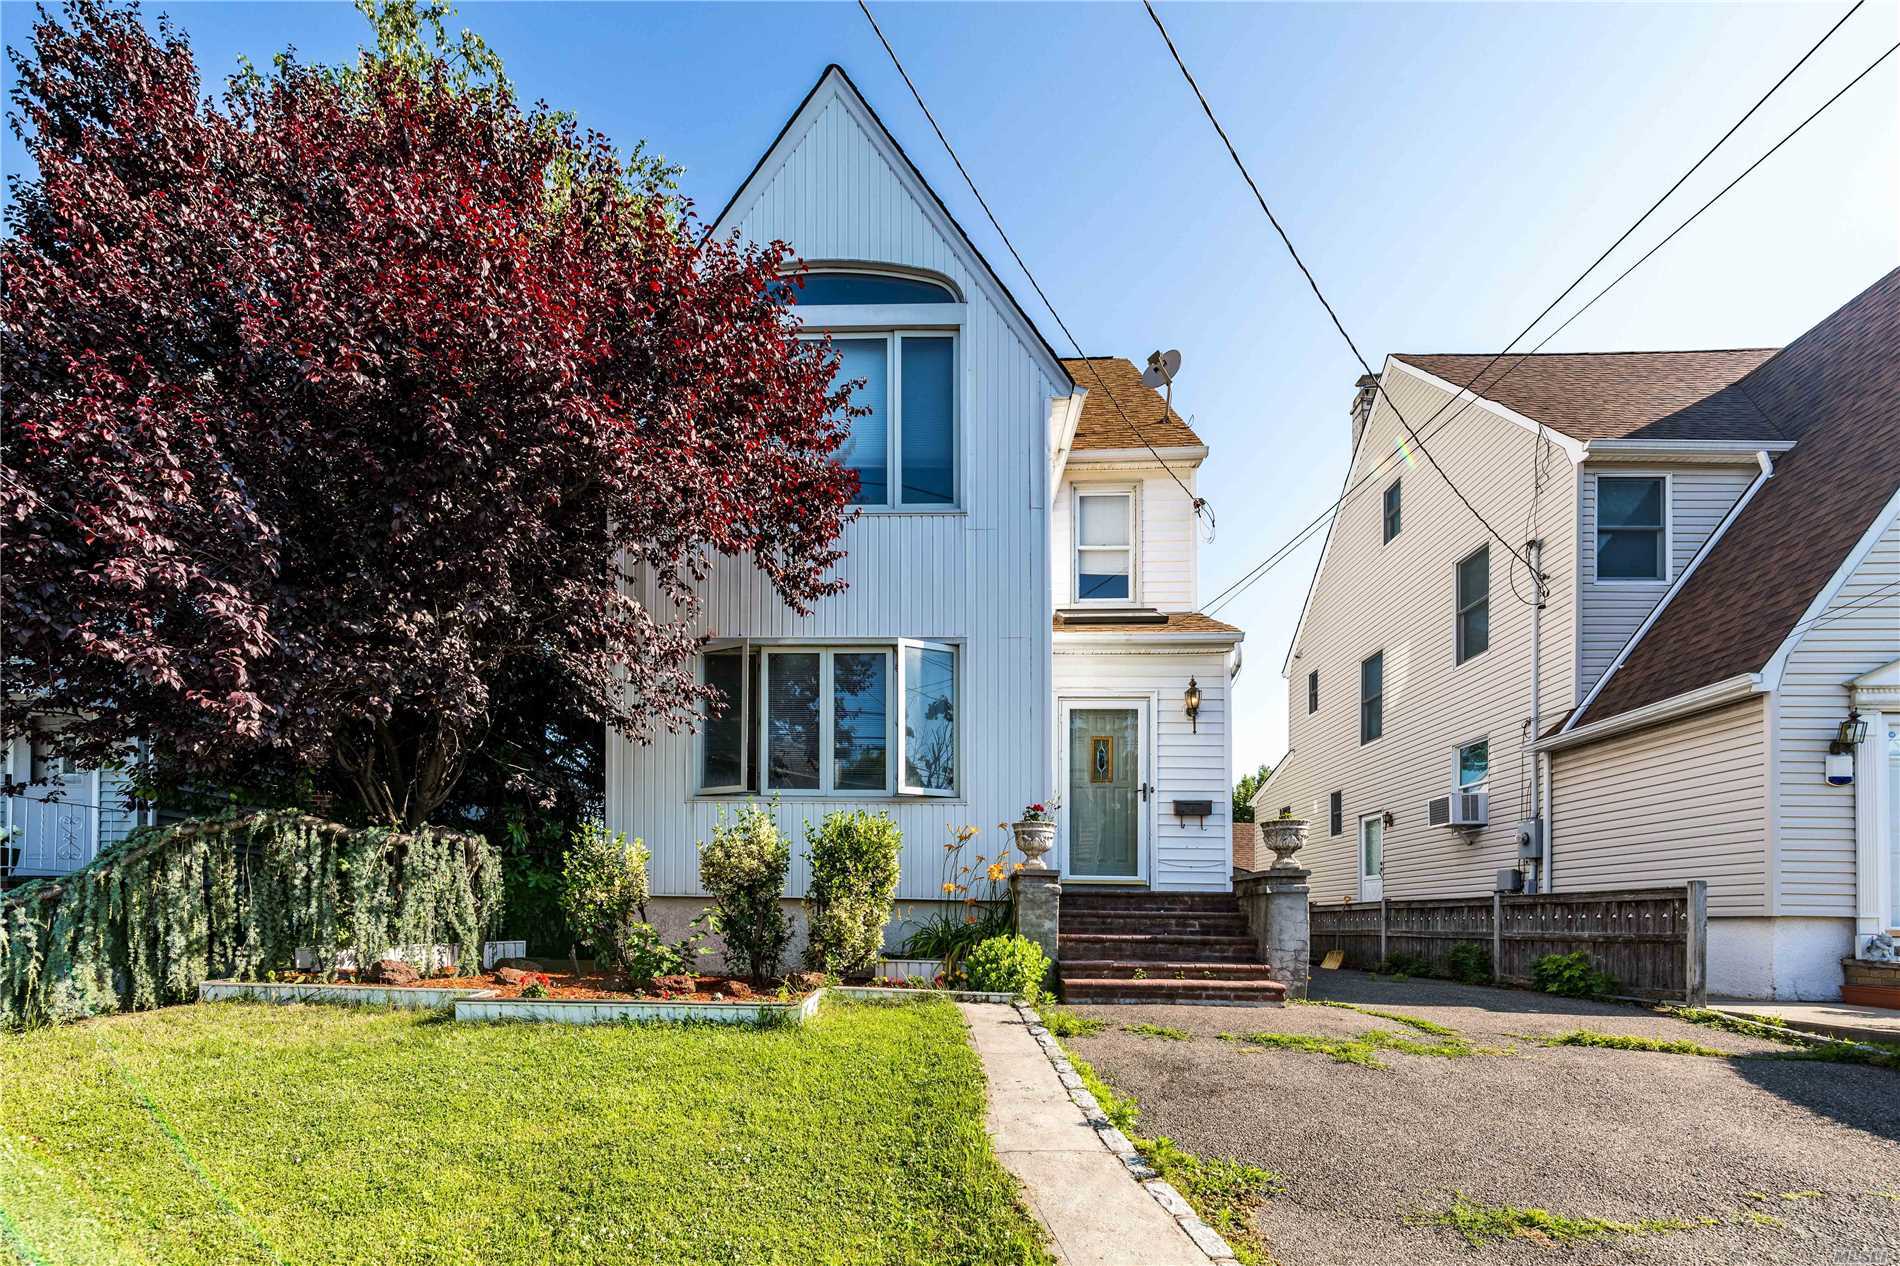 Gibson Colonial With Updated Kitchen & Baths. Updated Windows, Heat & Electric Box. Large Walk Up Attic And Finished Basement With Ose. Banquet Size Formal Dining Room With Extended Living Room. Seconds From Lirr, Parks & Shops.